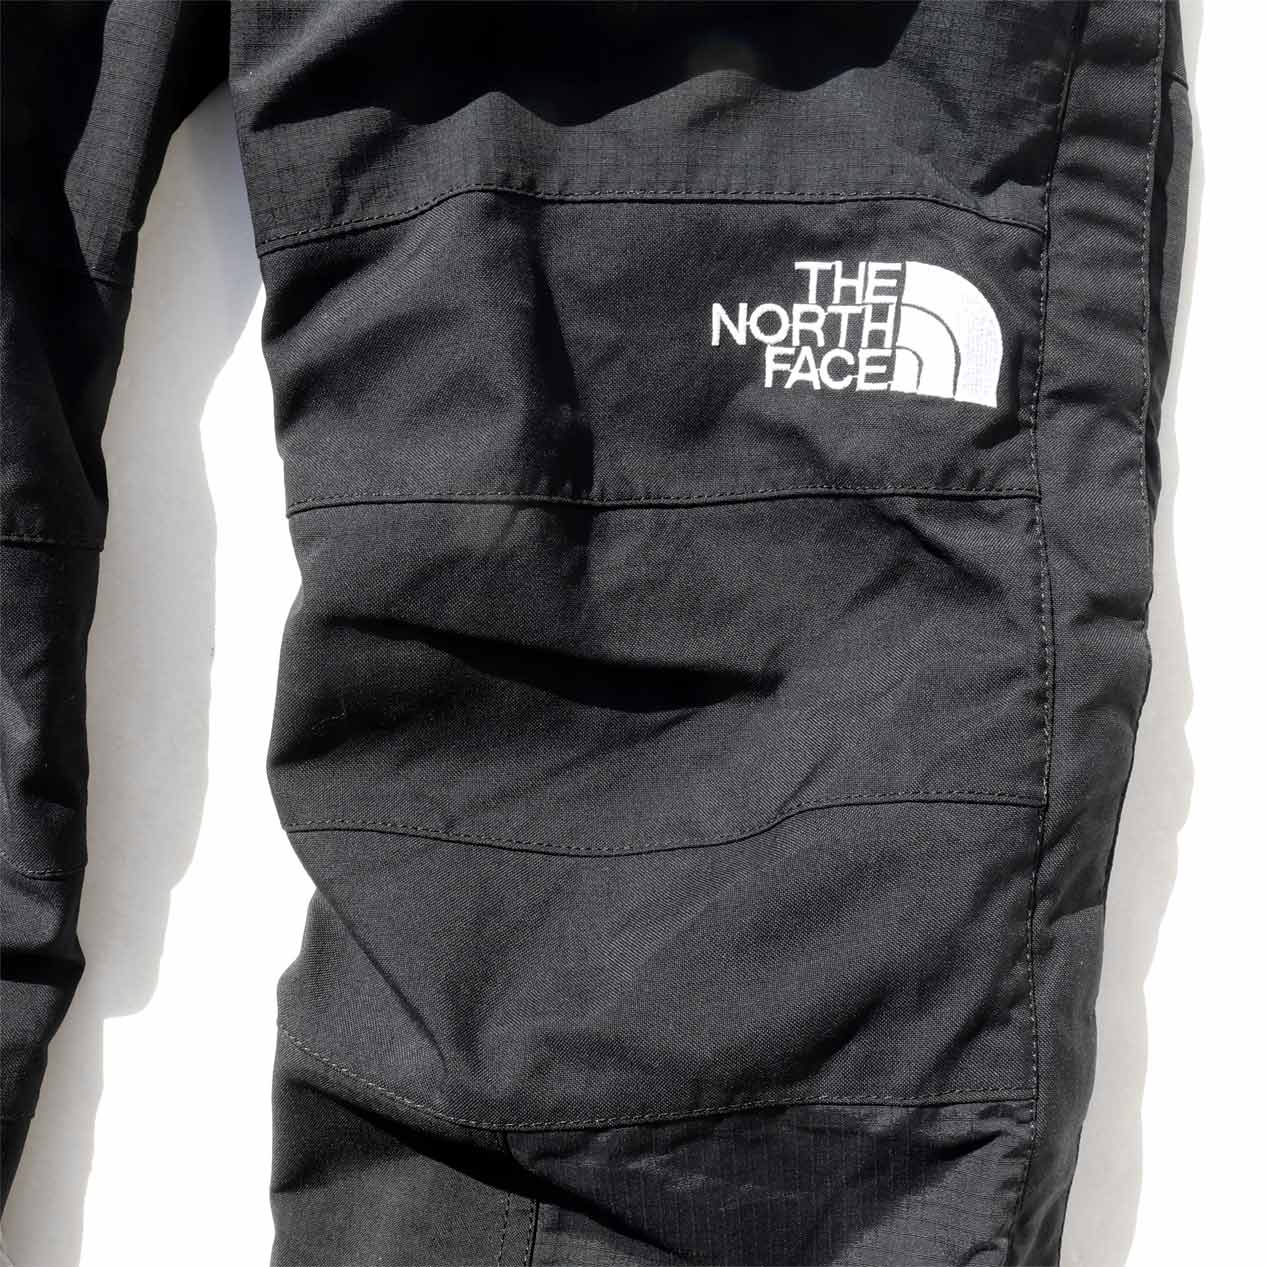 POST JUNK / 90's THE NORTH FACE All Black Dermizax Extreme Light 